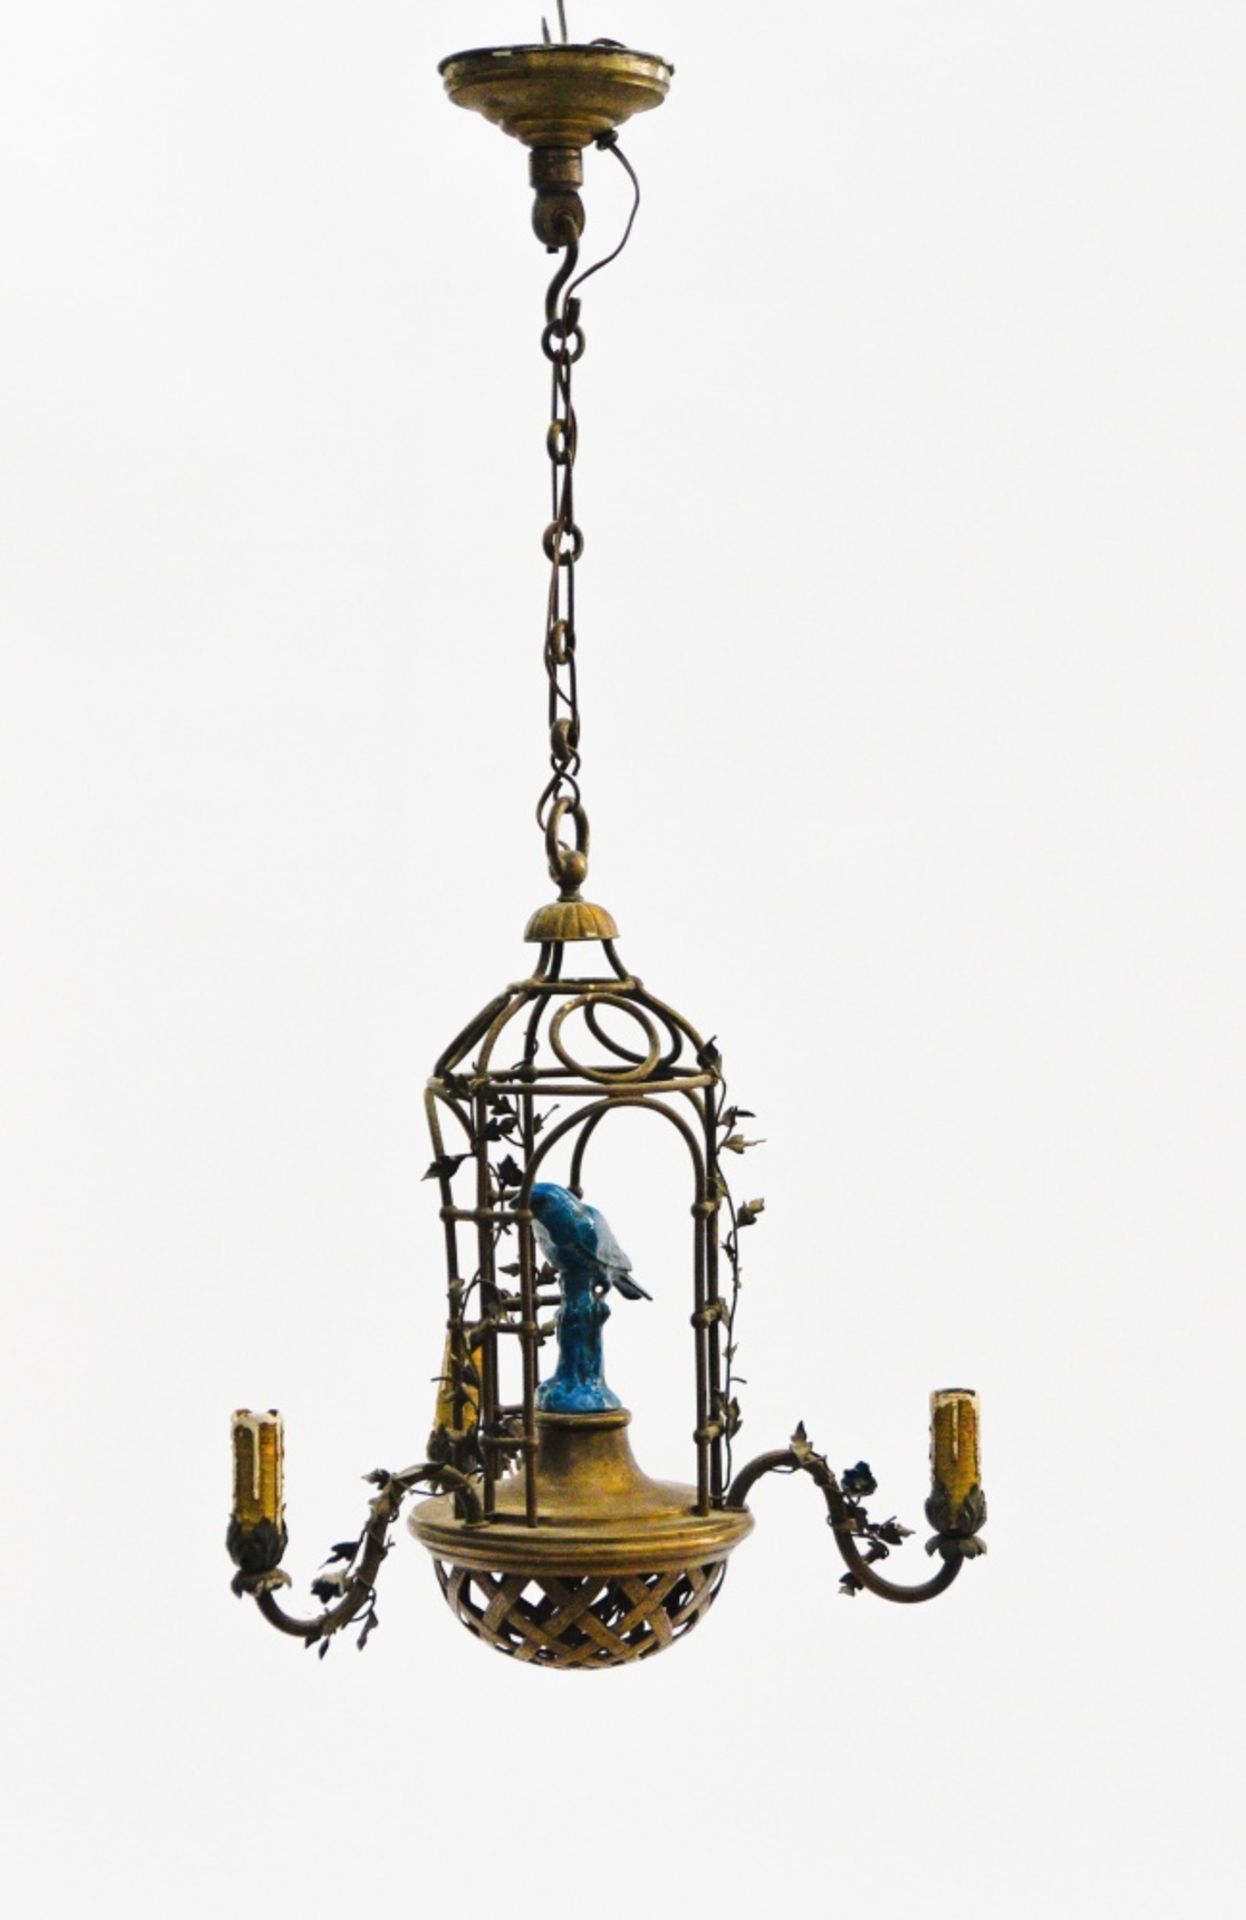 Late 19th century work Parrot chandelier, Gilt metal and porcelain. Height (cm) : 90 - - Diameter (